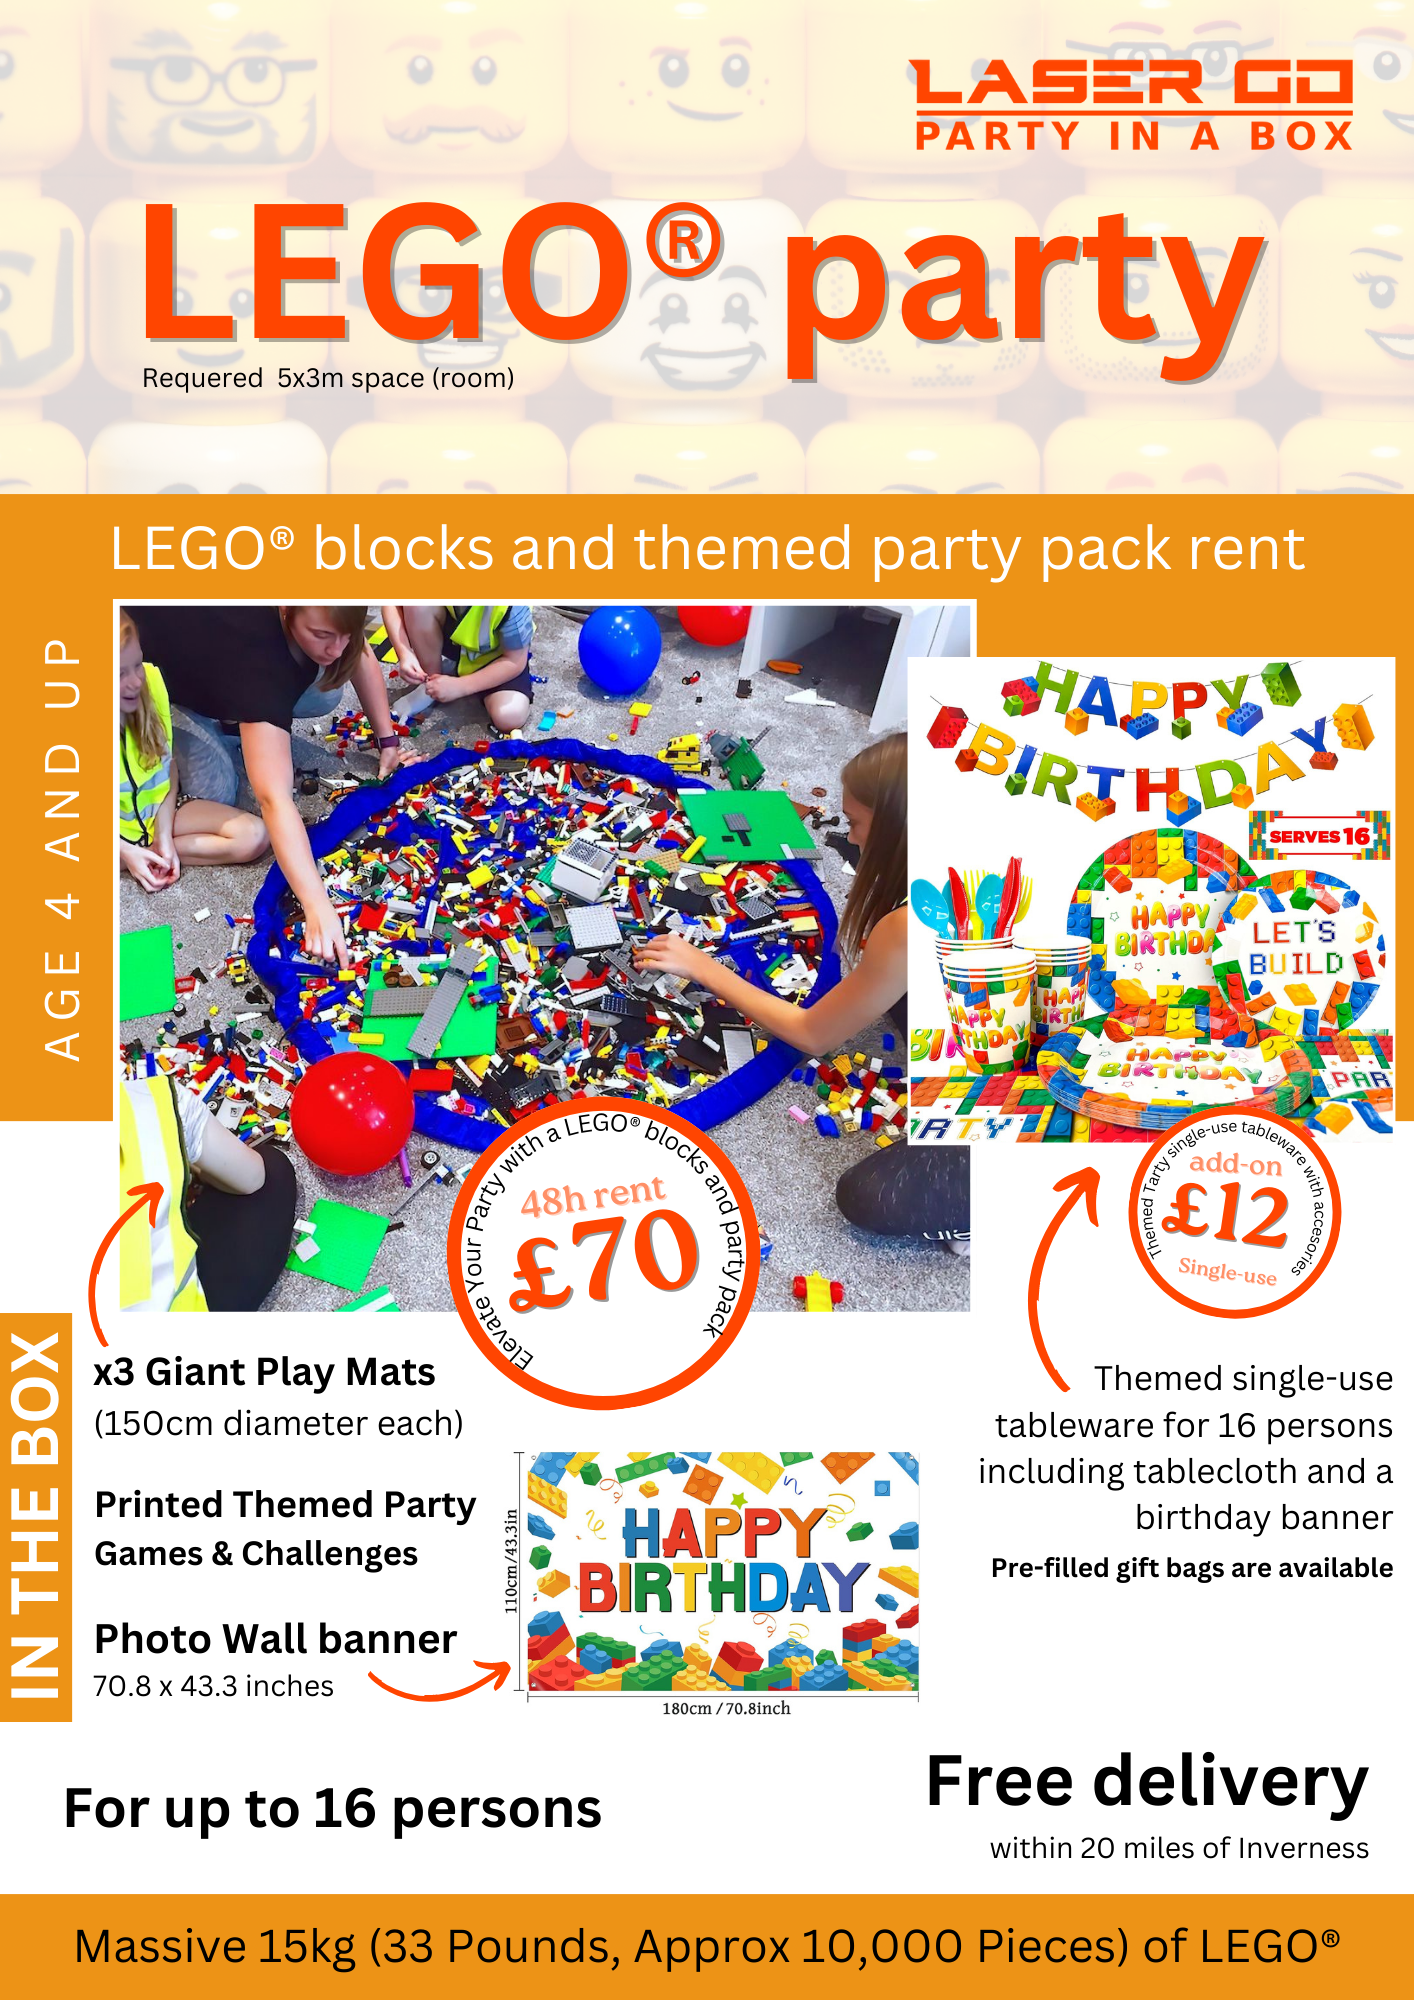 LEGO® party - Party in a box hire